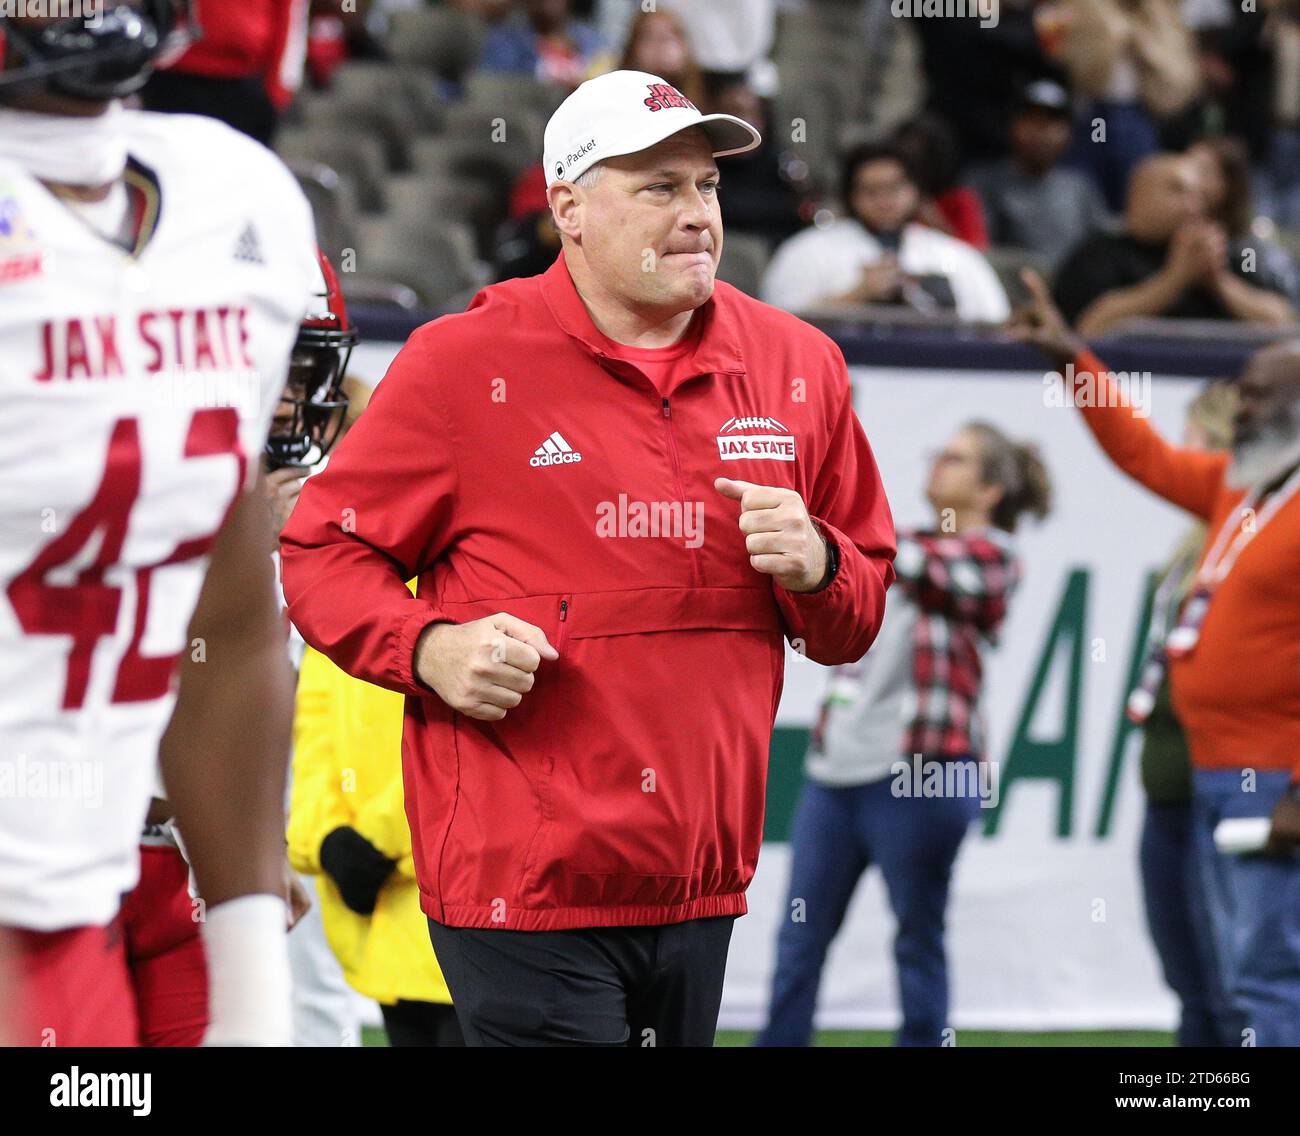 December 16, 2023: Jax State Rich Rodriguez runs onto the field prior to the 2023 R&L Carriers New Orleans Bowl football game between the Jacksonville State Gamecocks and the Louisiana Ragin' Cajuns at Caesars Superdome in New Orleans, LA. Kyle Okita/CSM Stock Photo